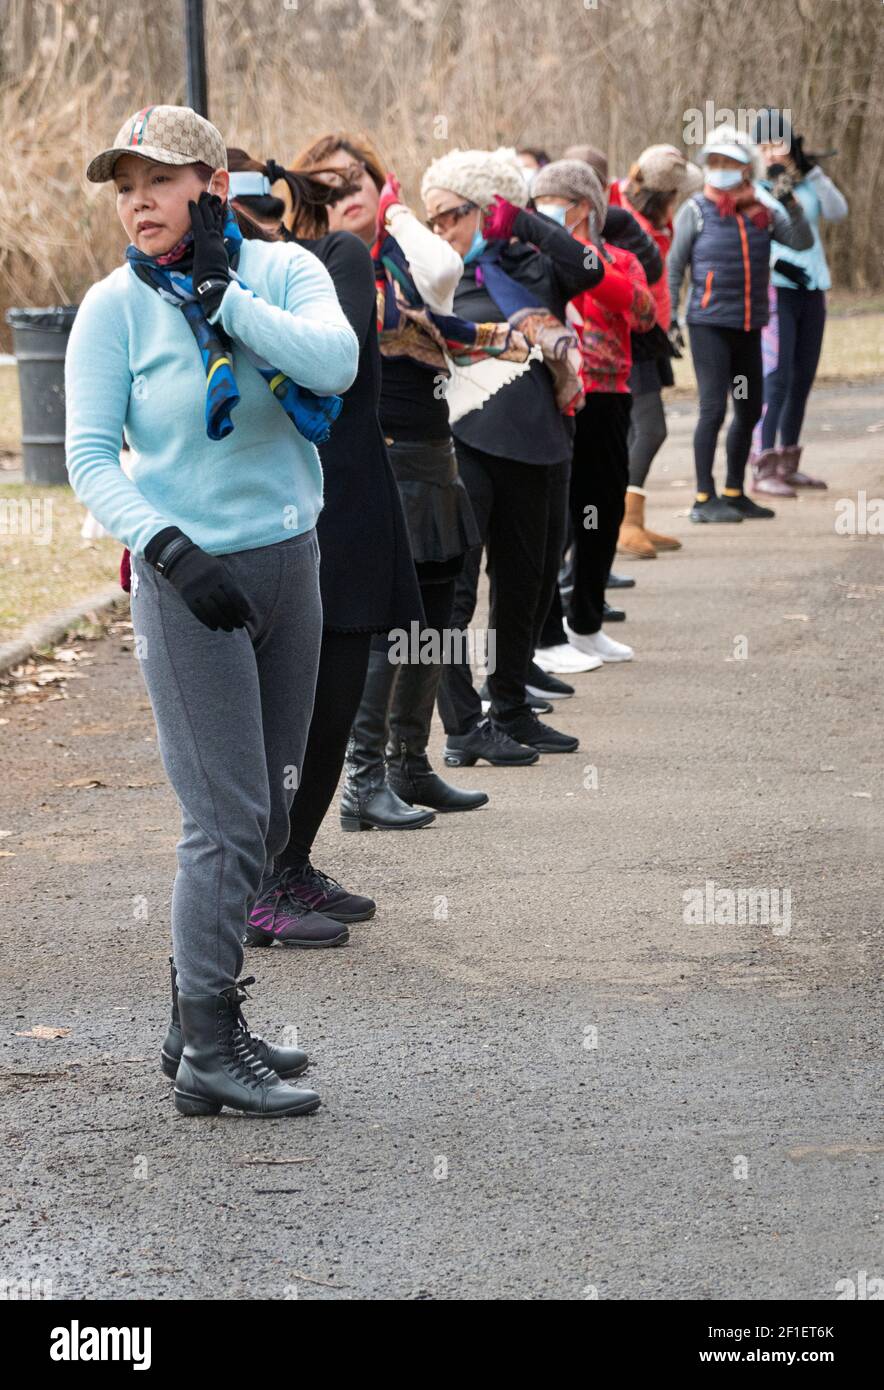 On a winter morning, Asian American women, primarily Chinese, attend a dance exercise class in a park in Flushing, Queens, New York City. Stock Photo